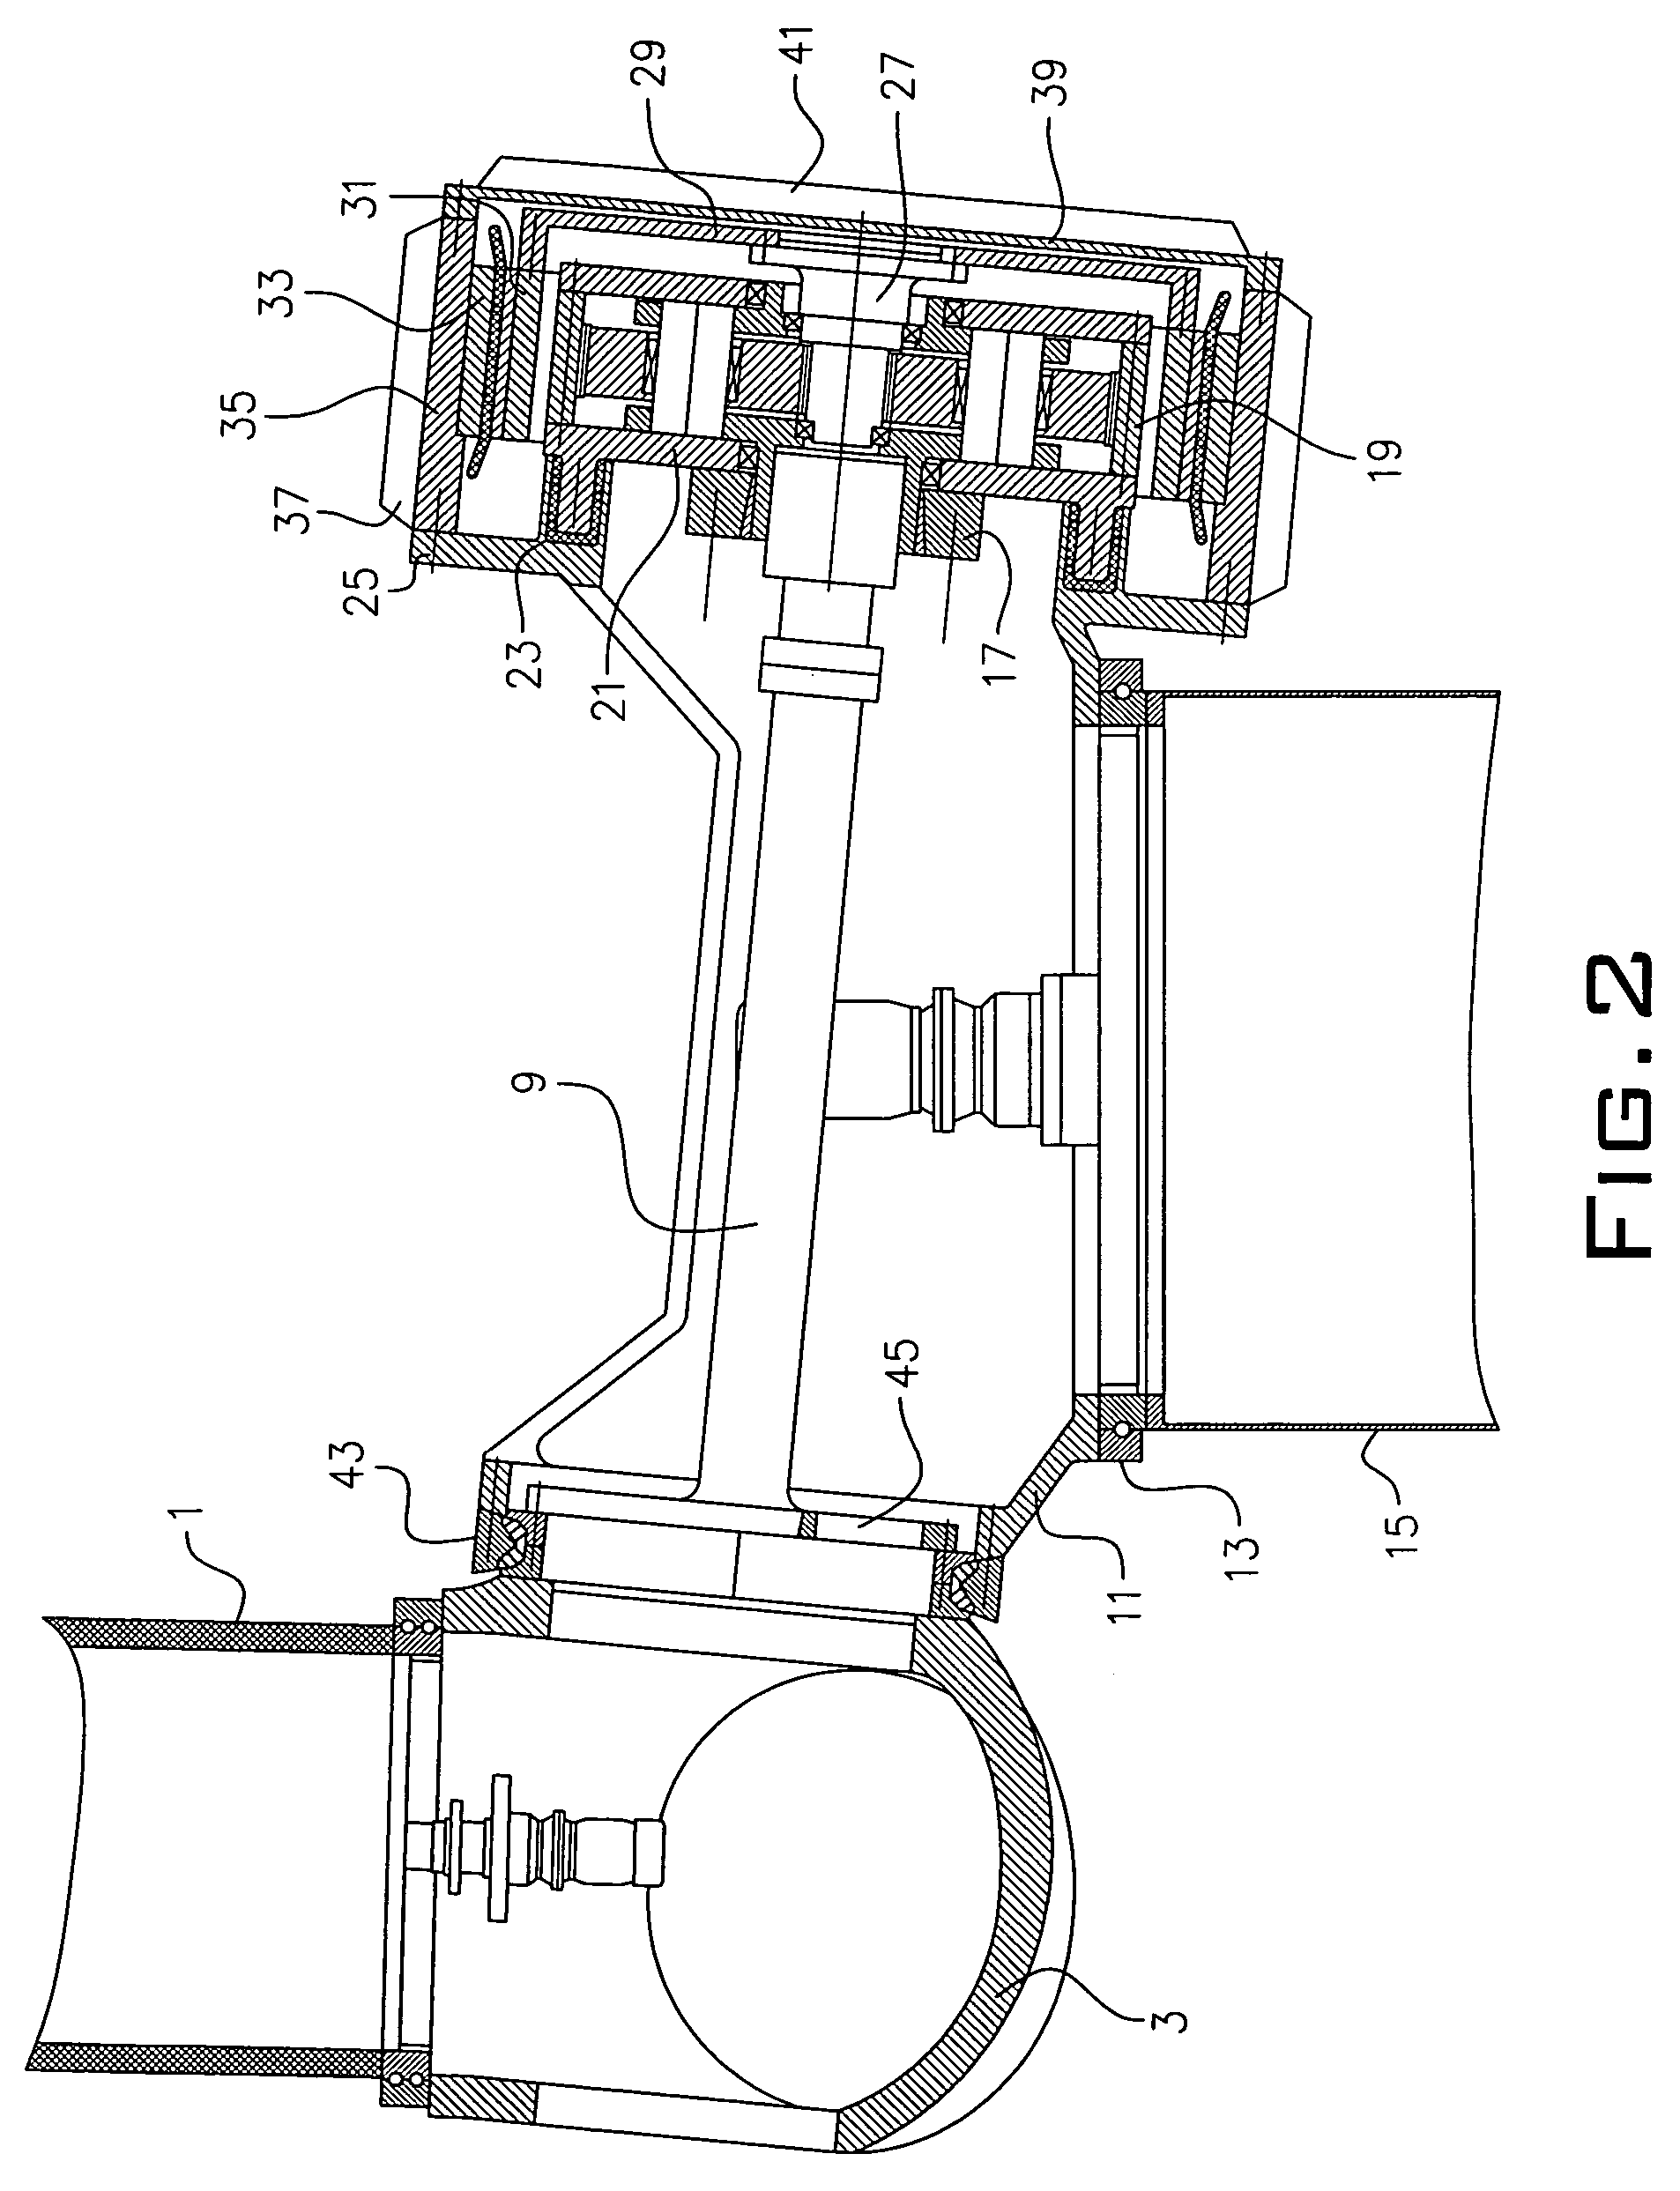 Wind energy installation comprising a concentric gearbox generator arrangement